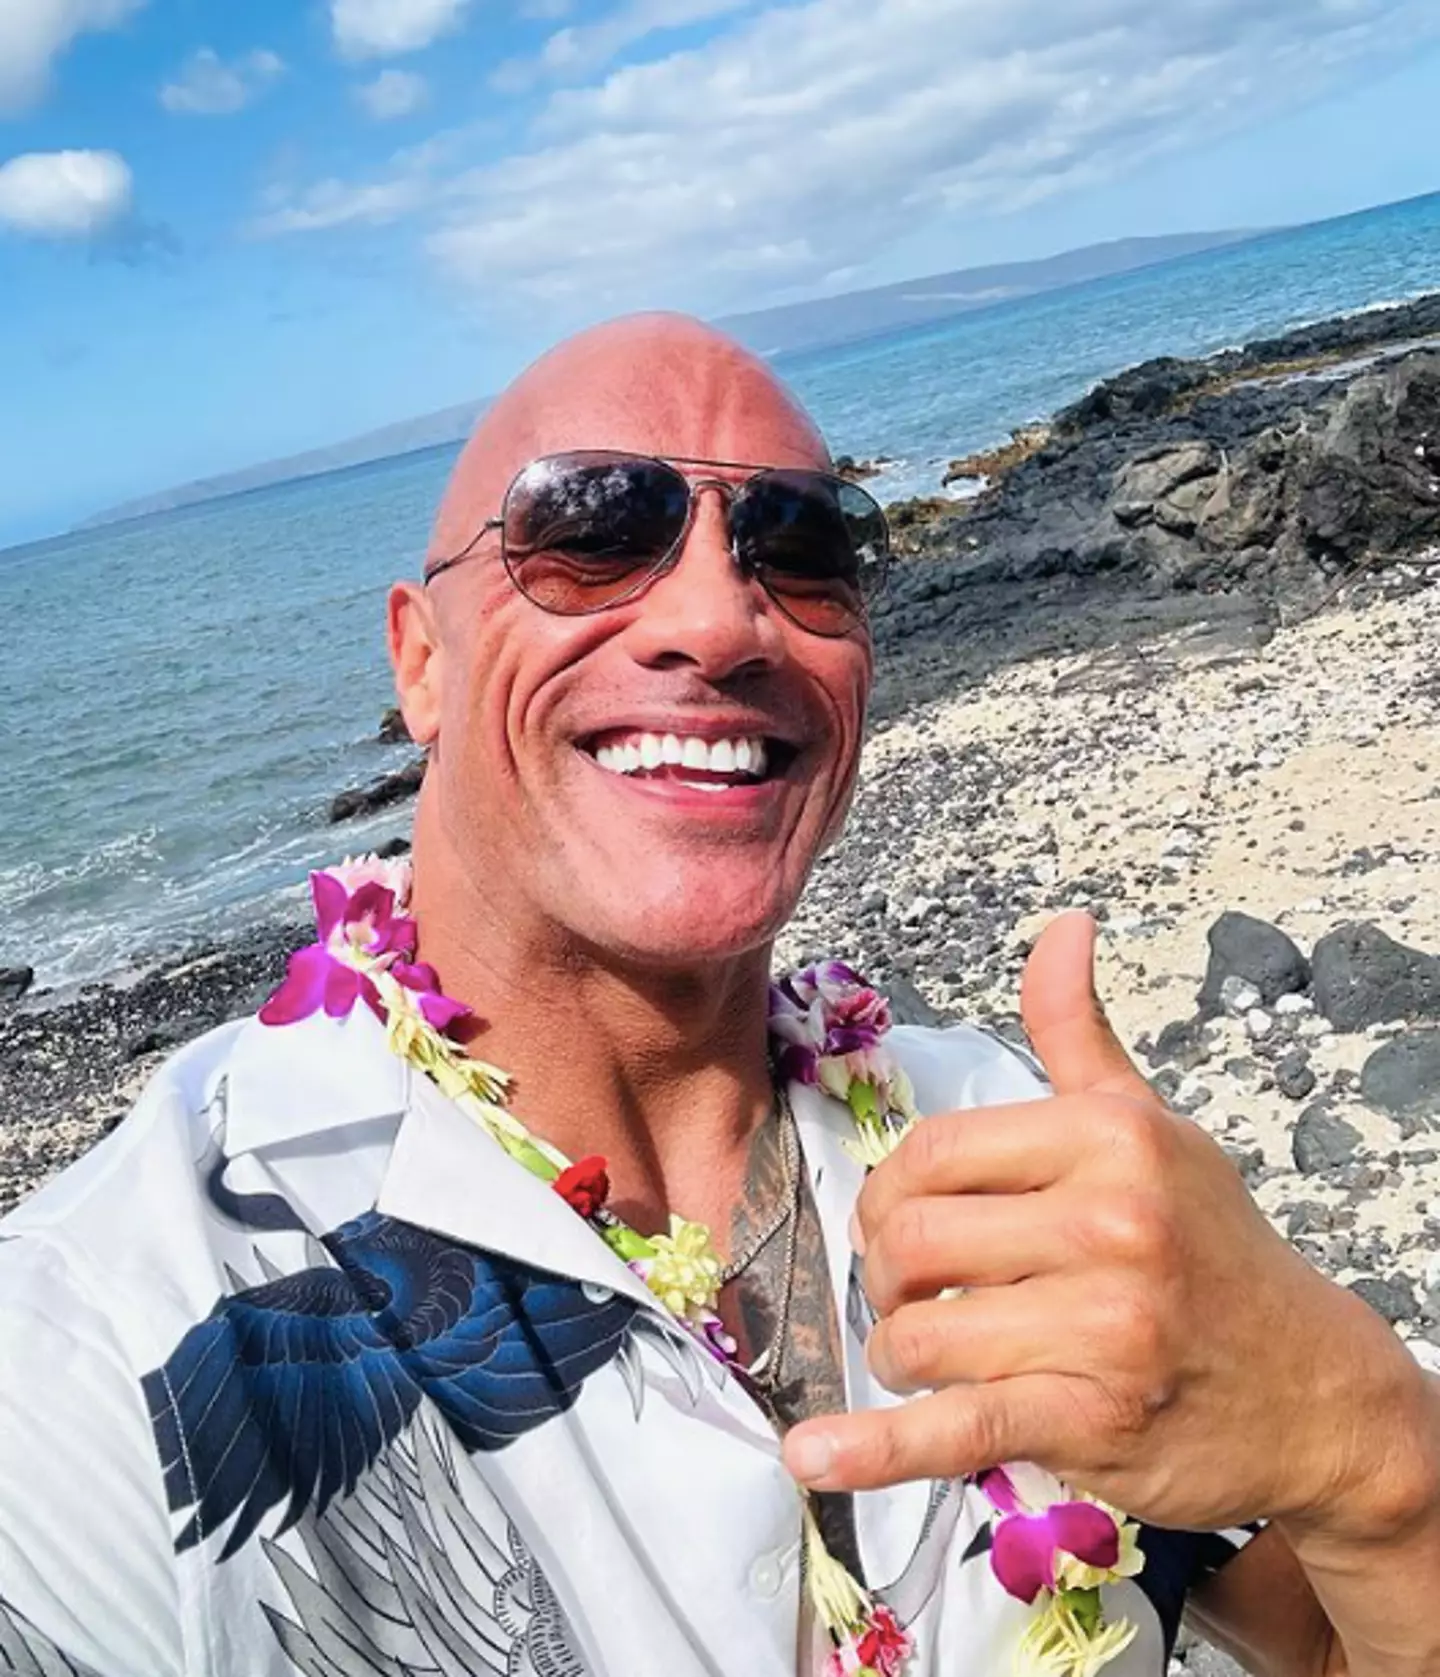 The Rock reunites with Jumanji director on Red One.